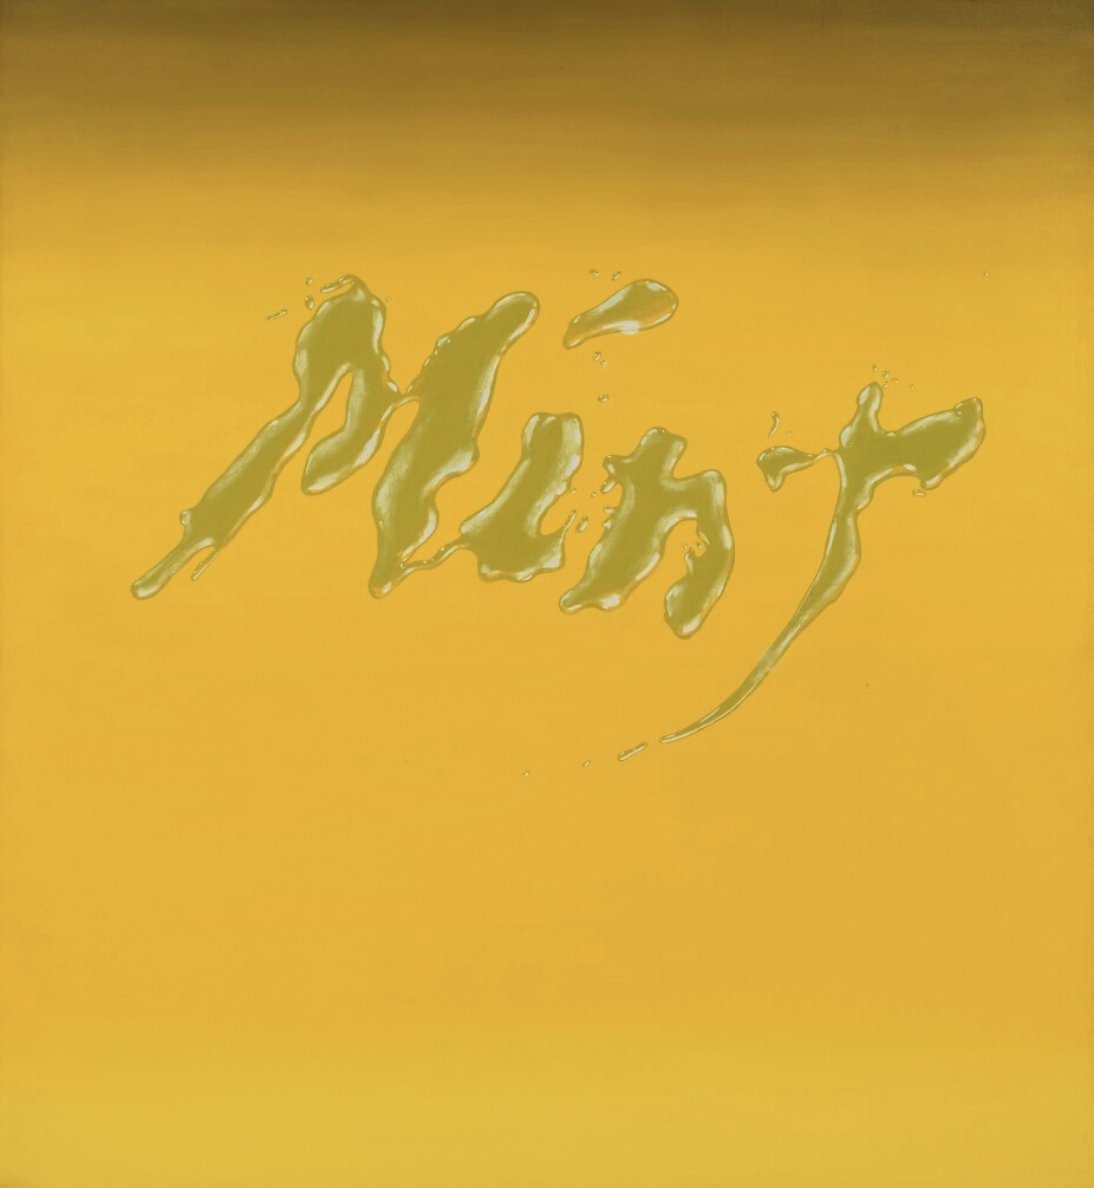 #AuctionUpdate: Capturing the duality of transience and endurance that challenges the very fixity of semiotic meaning, Ed Ruscha's ‘Mint (Green)’ achieves $12.9m #TheFisherLandauLegacy